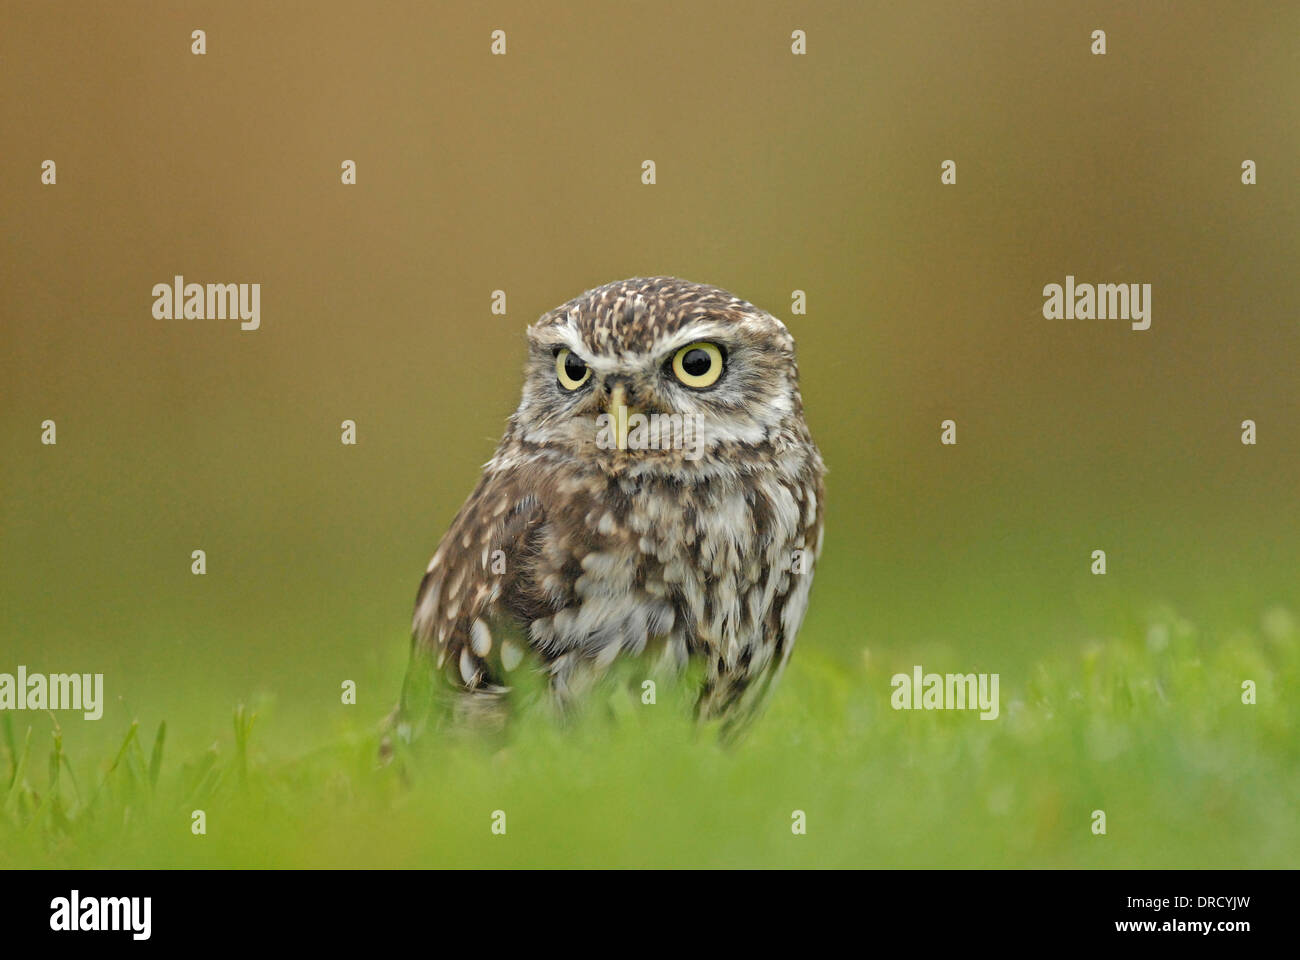 Little owl (Athene noctua). The species often hunts on the ground, especially for beetles and worms. This is a captive bird. Stock Photo